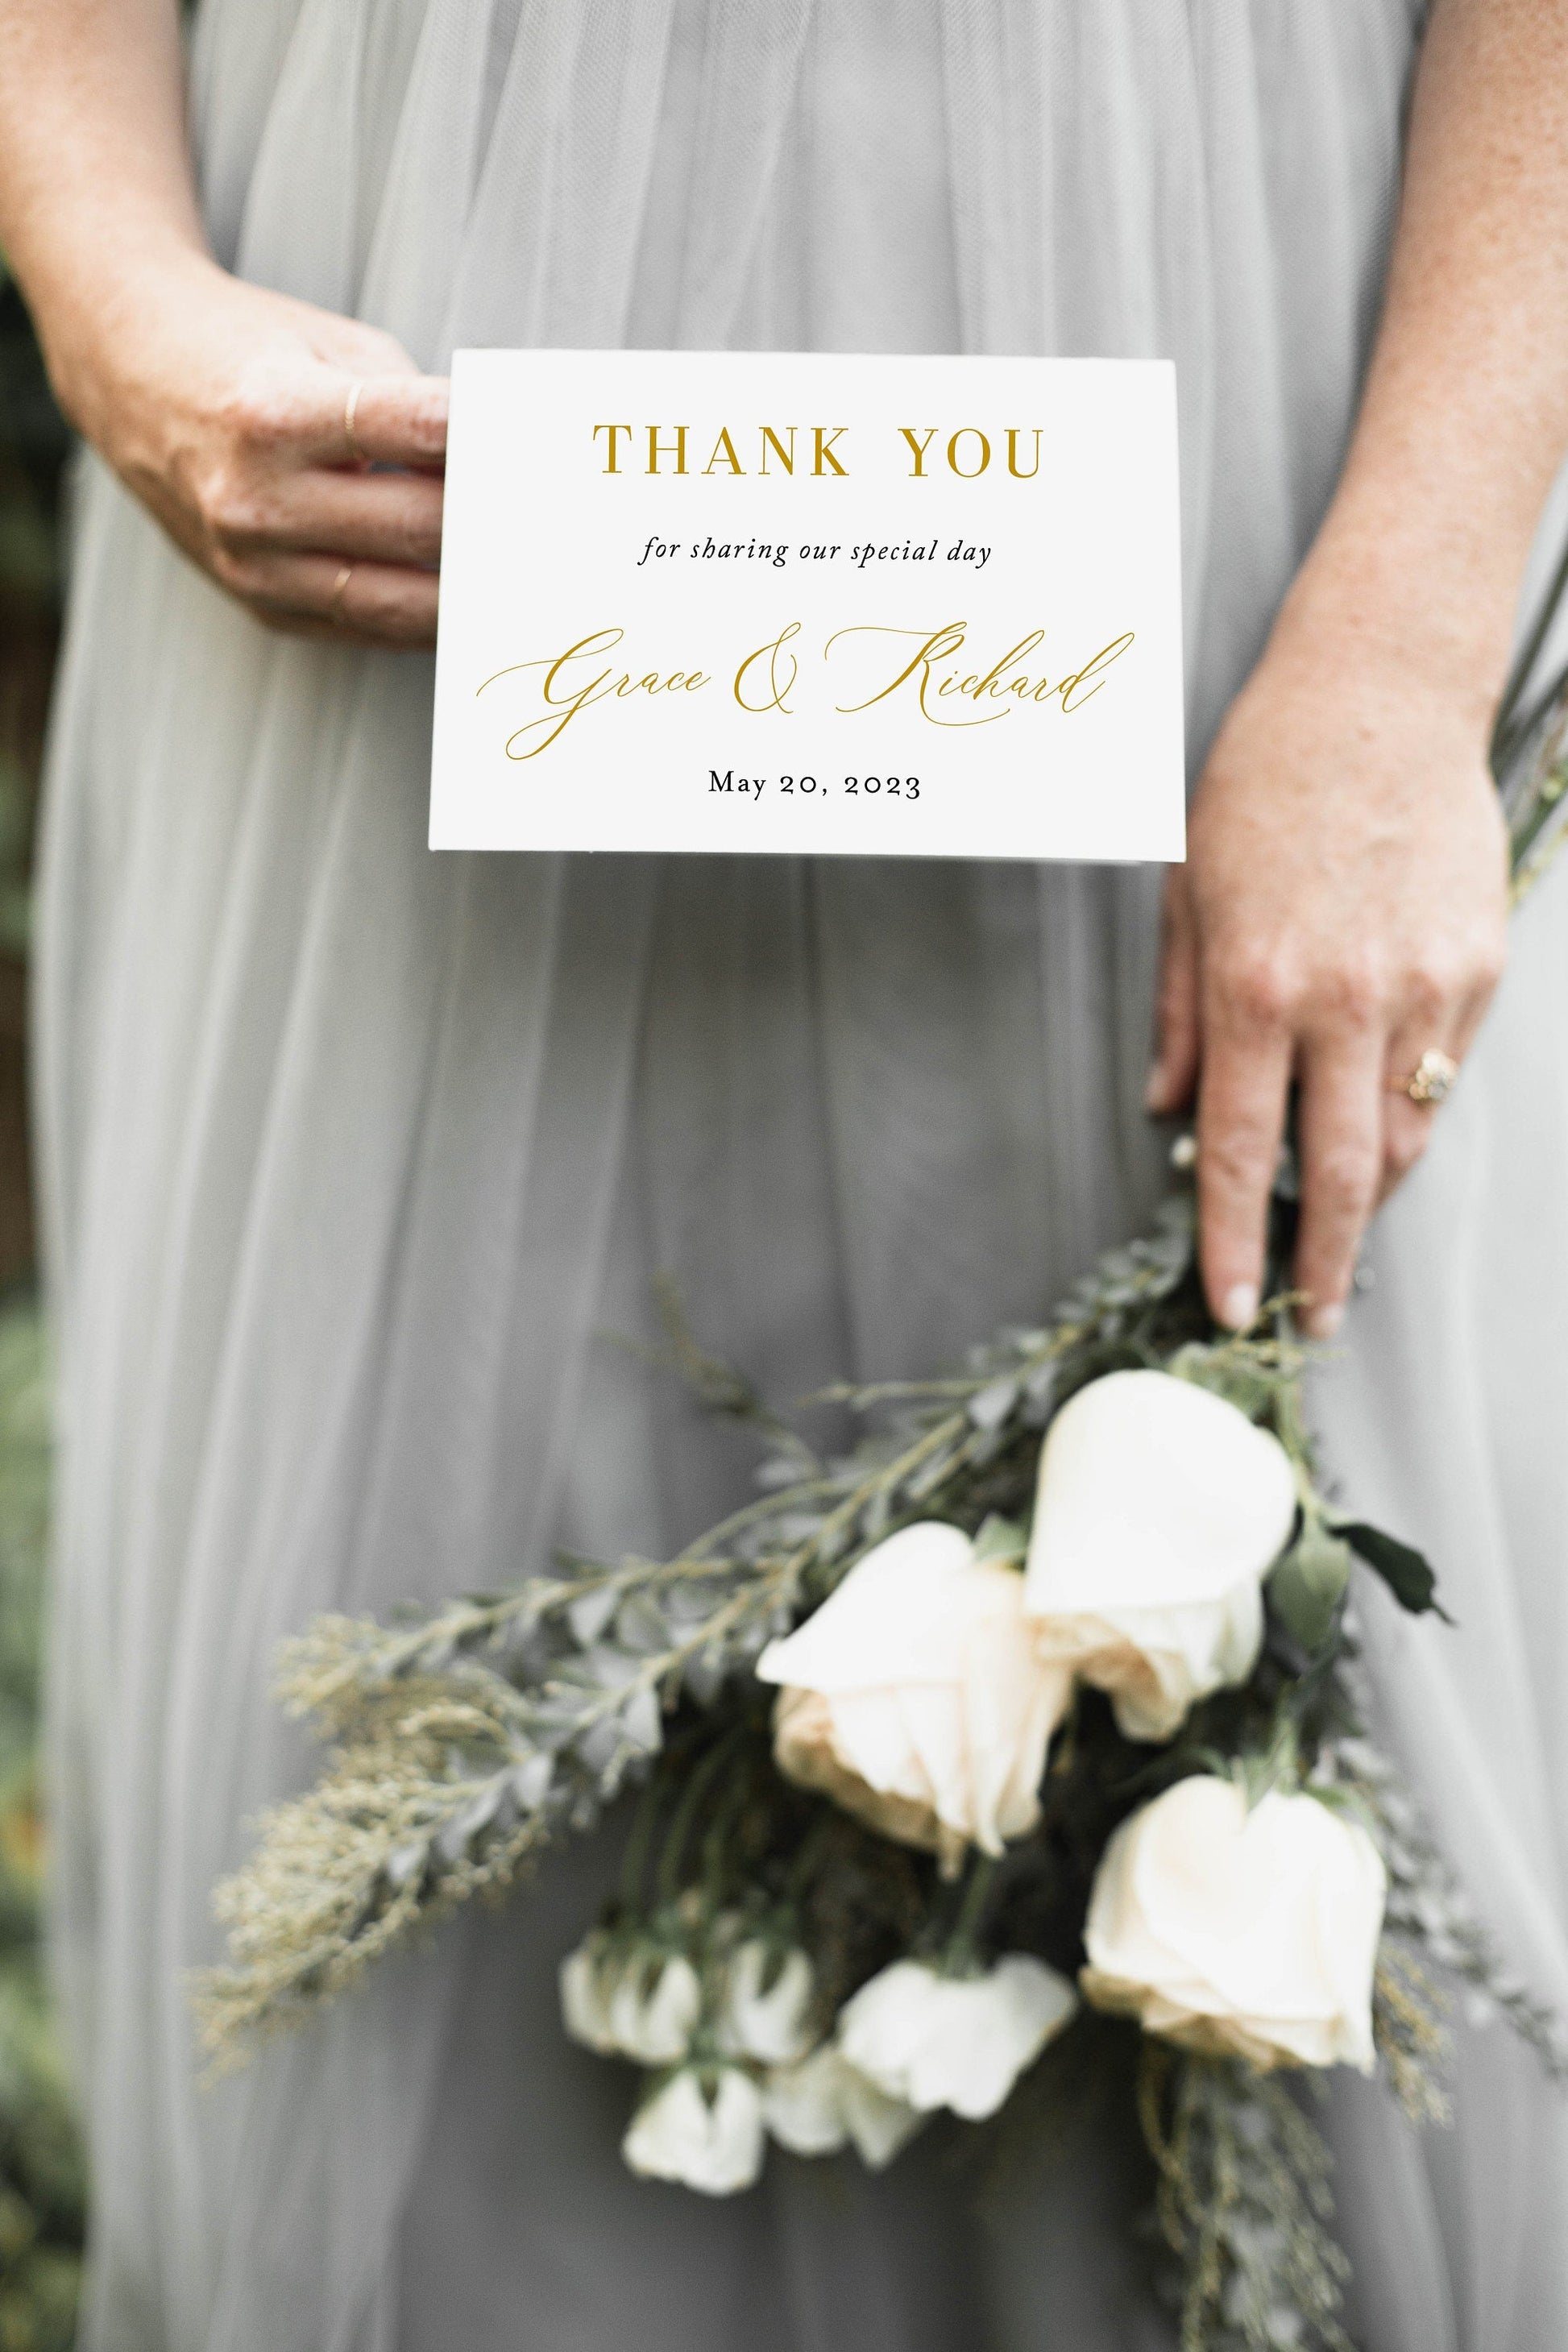 Wedding Thank You Card, Instant Download, Thank you Cards, Printable Thank You, Wedding Cards, Calligraphy  - Grace TAGS | TY | INSERTS SAVVY PAPER CO